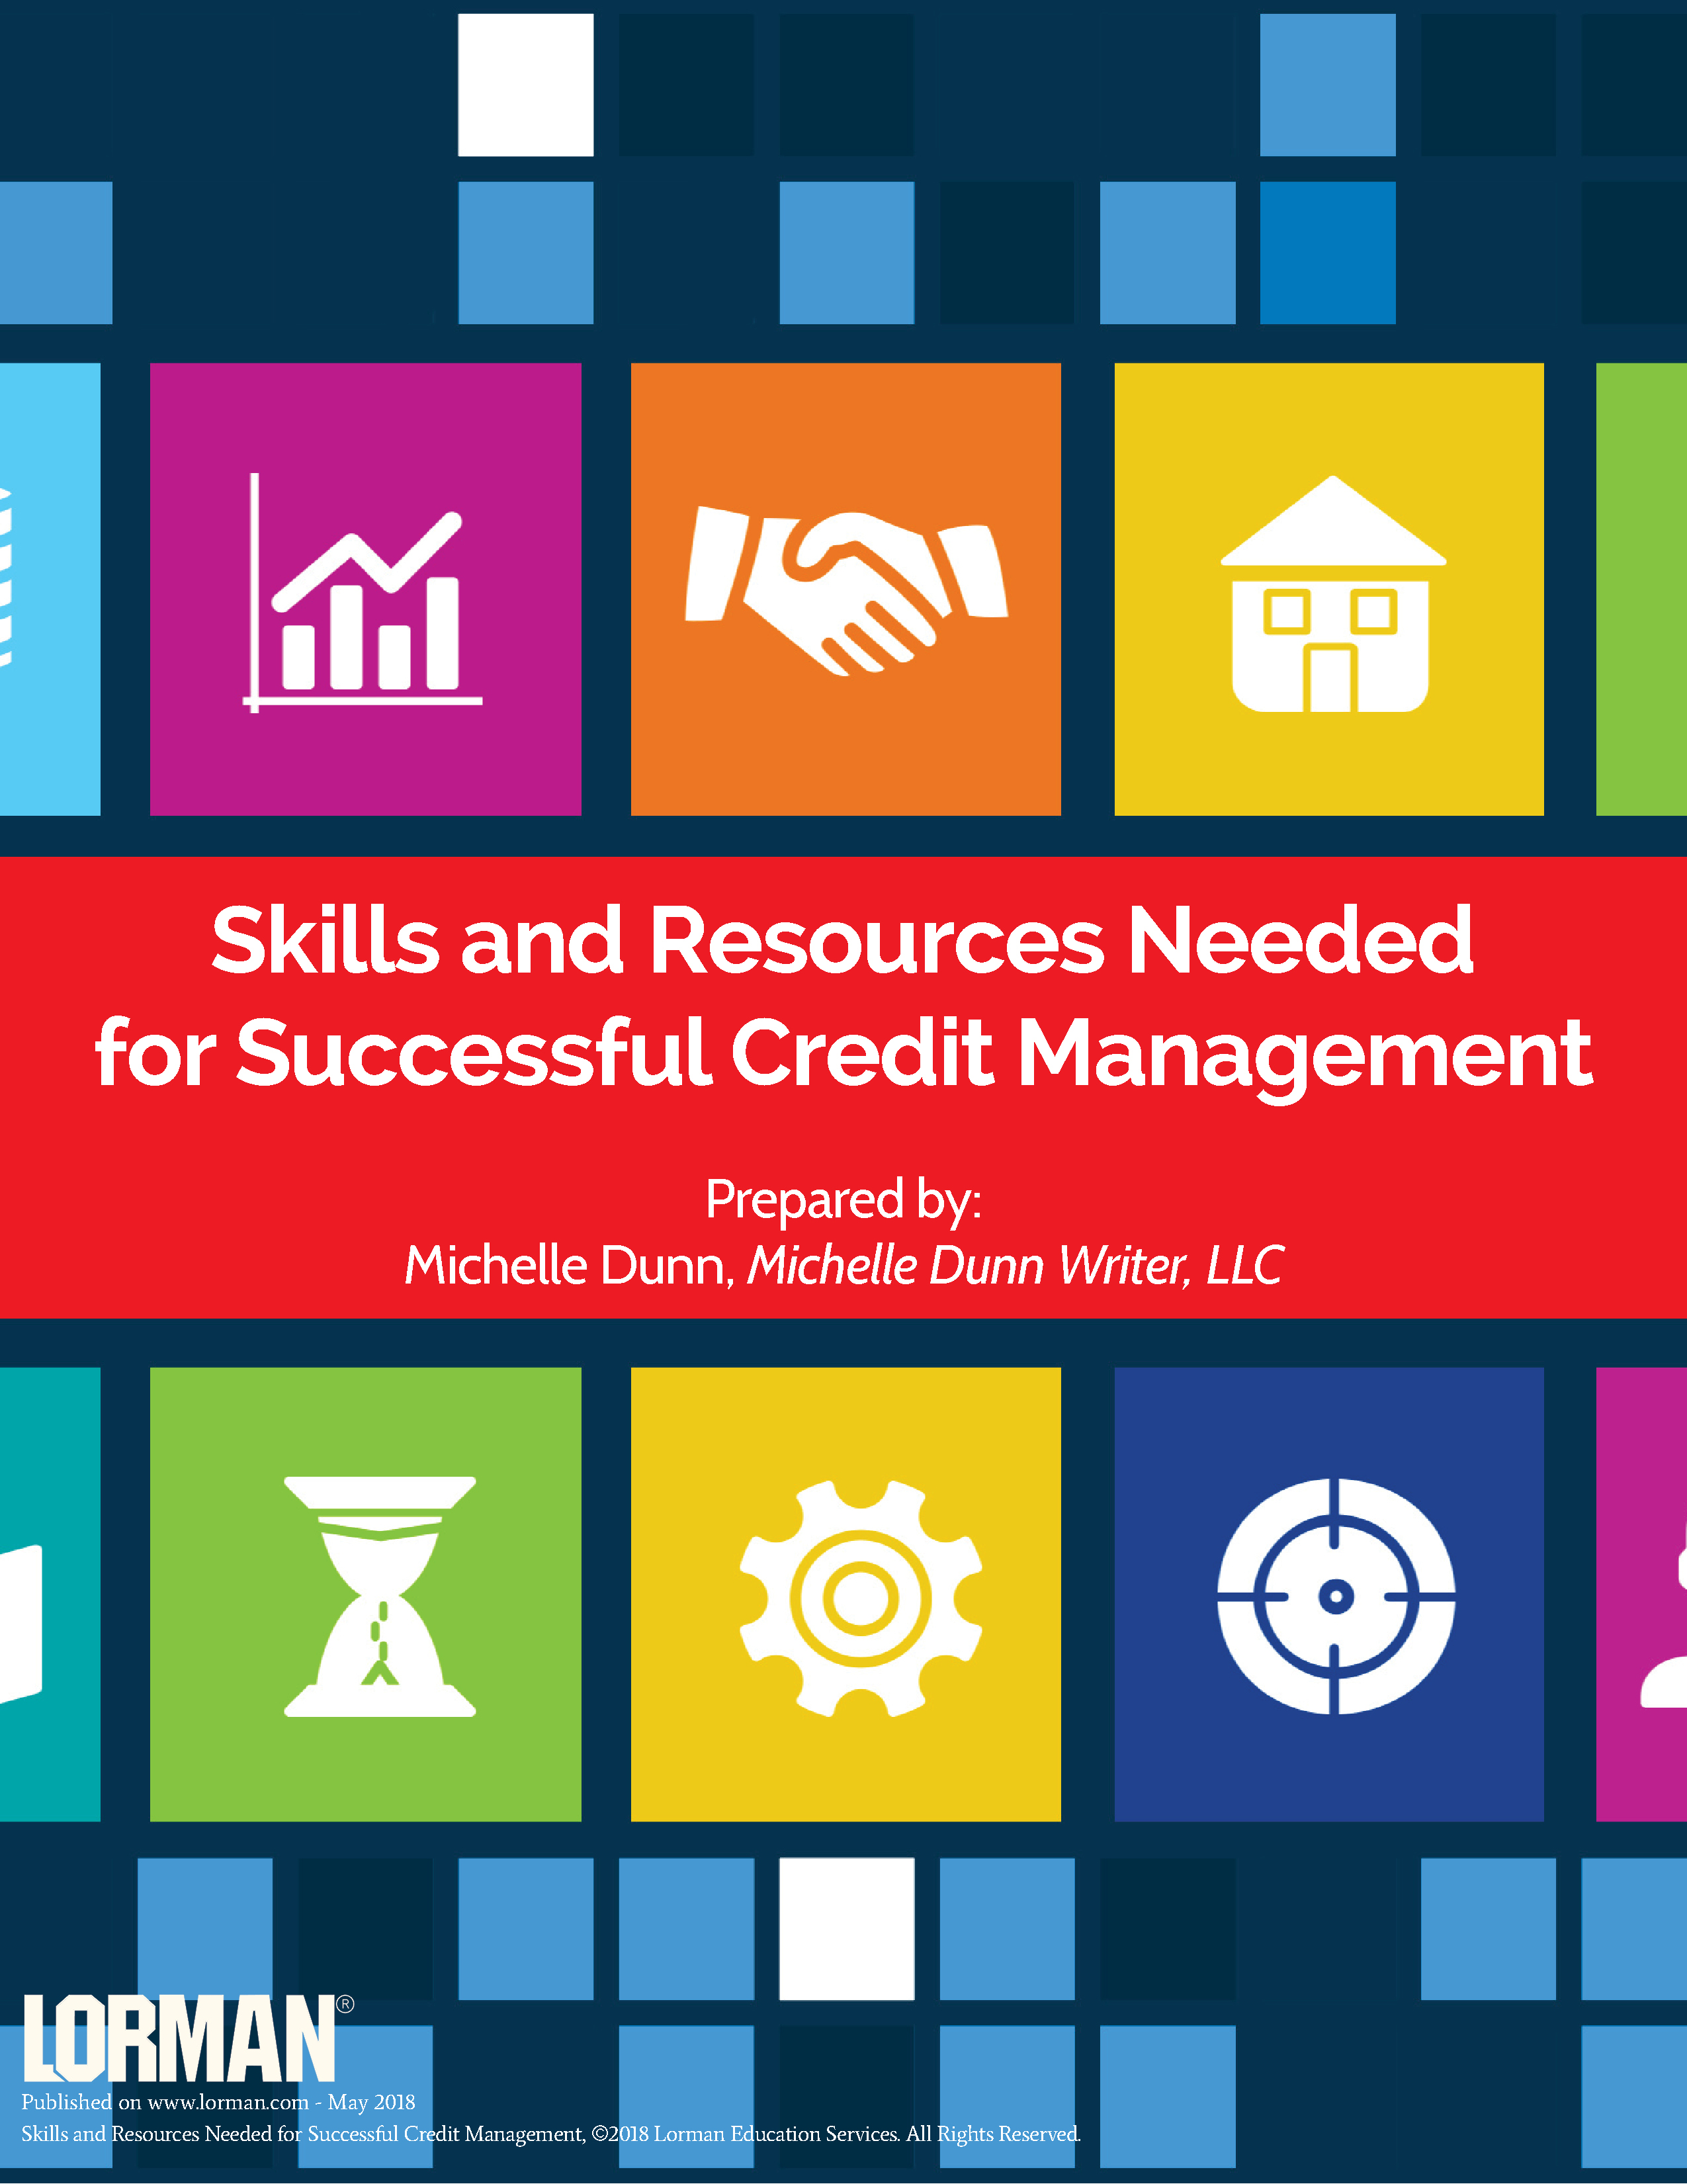 Skills and Resources Needed for Successful Credit Management